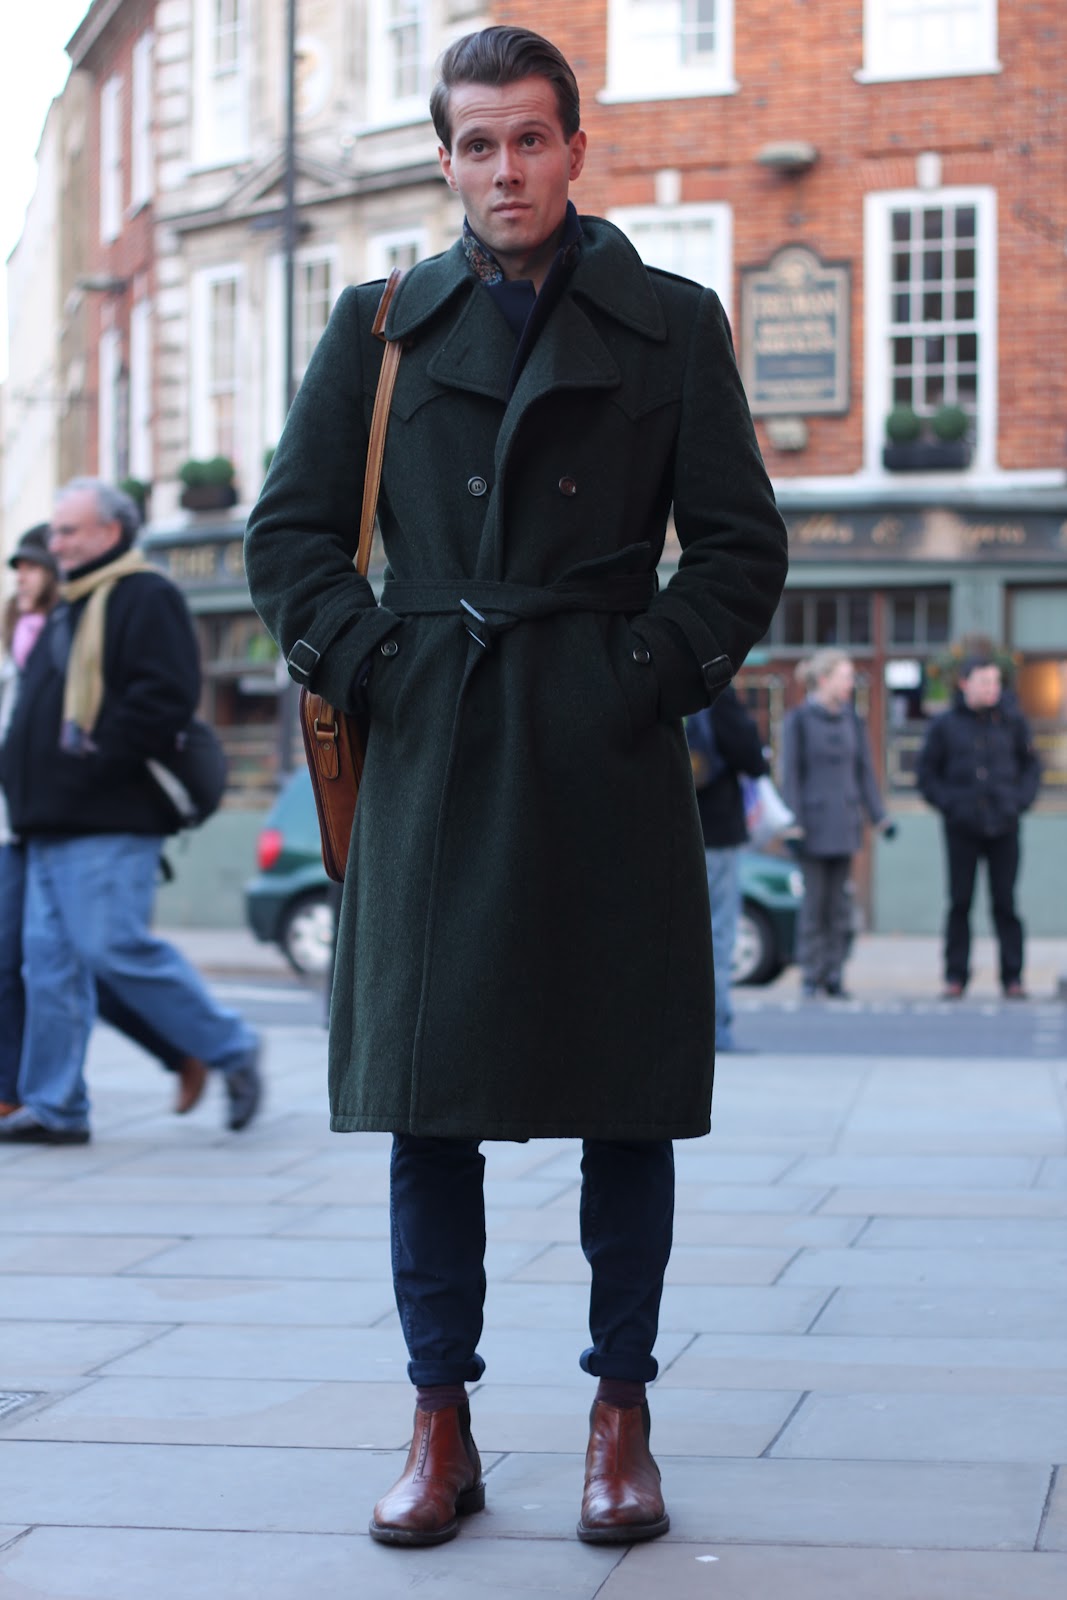 London Fashion by Paul: Street Muses